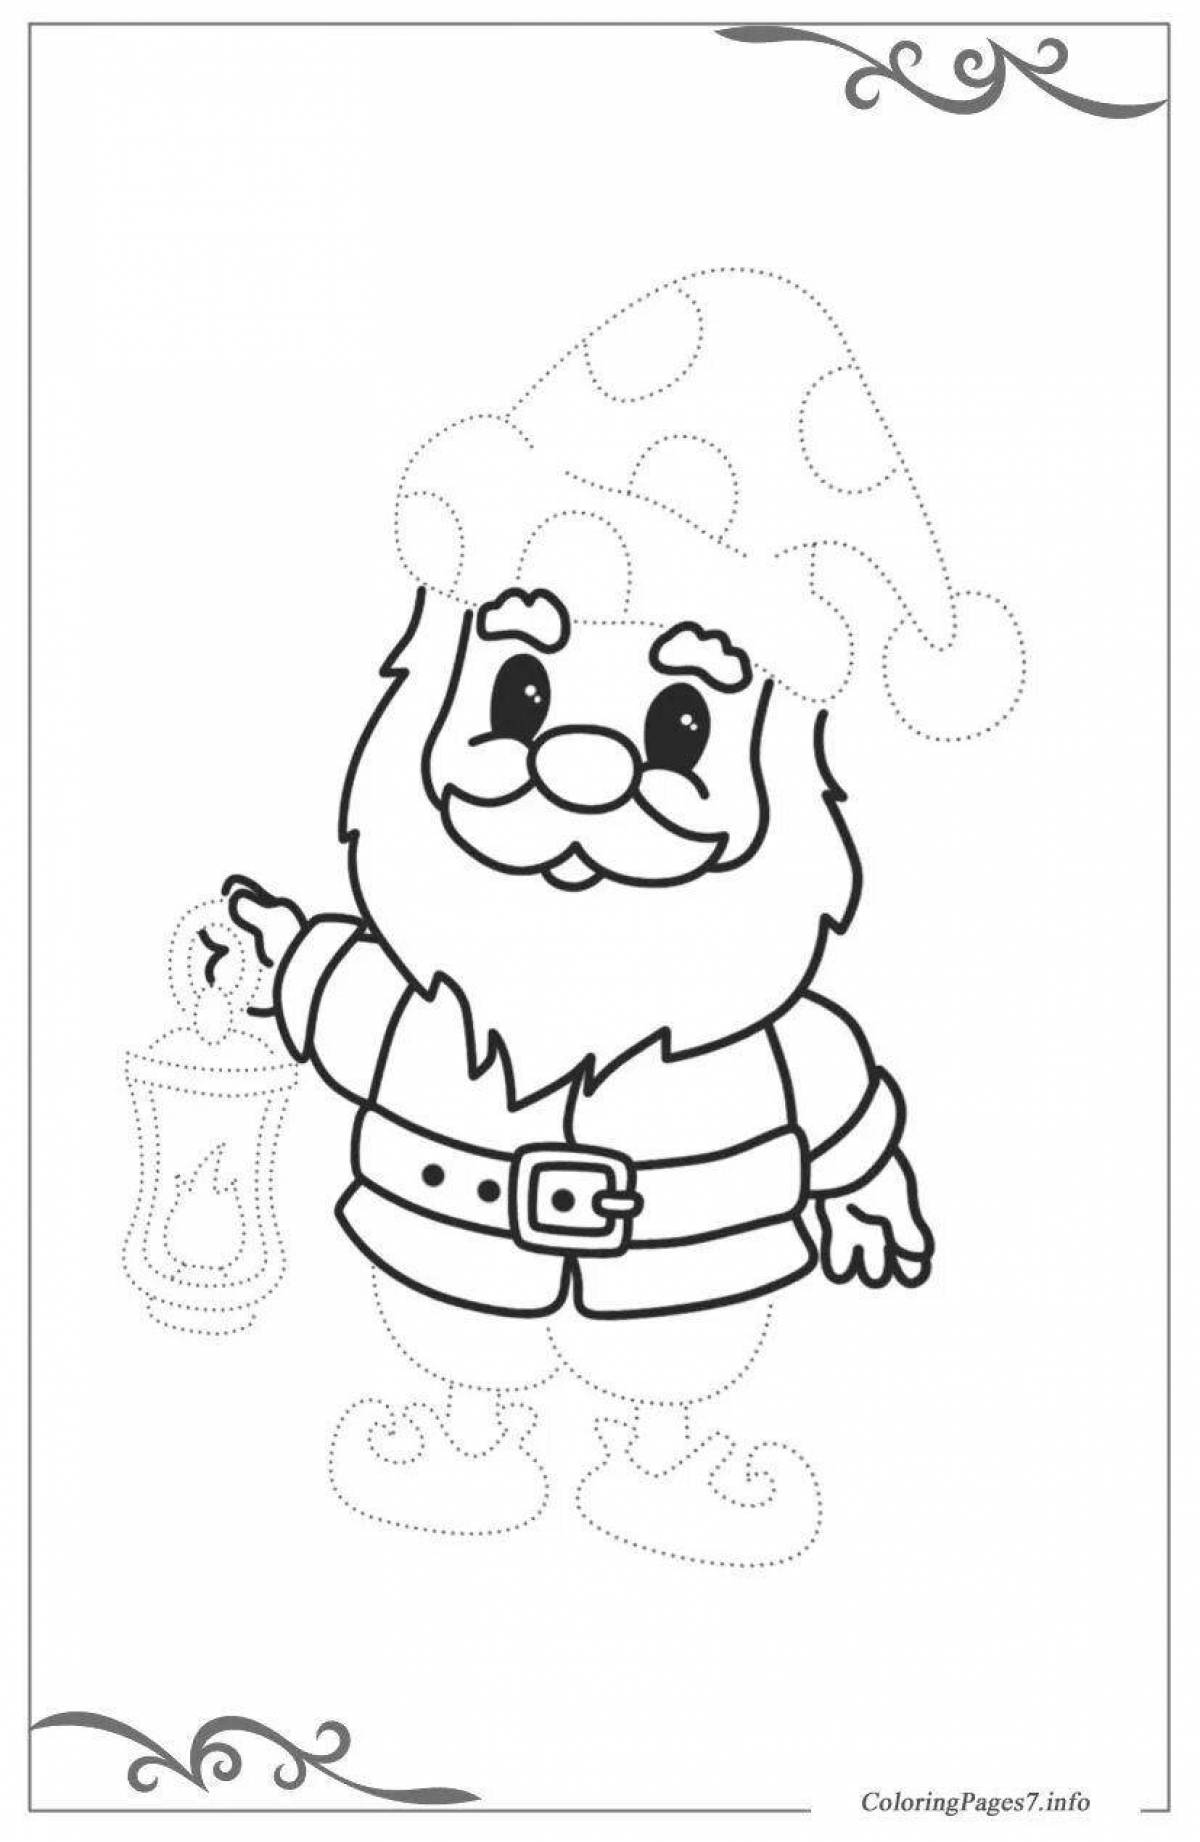 Coloring for the Nice Lumberjack for Students